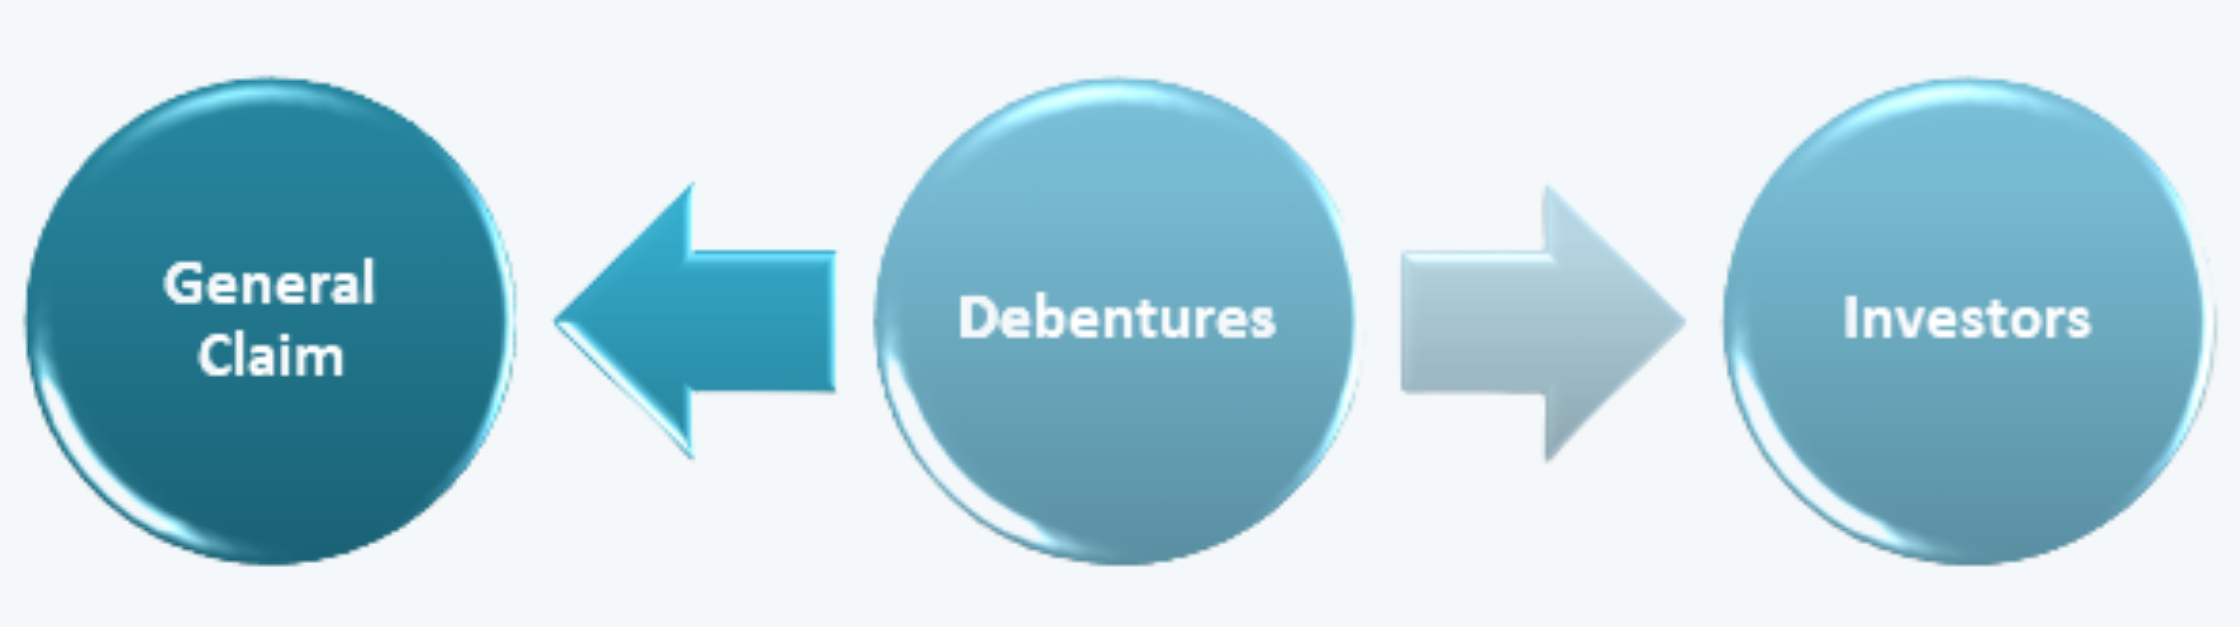 Structure of debentures Fixed Income CFA Level 1 Study Notes